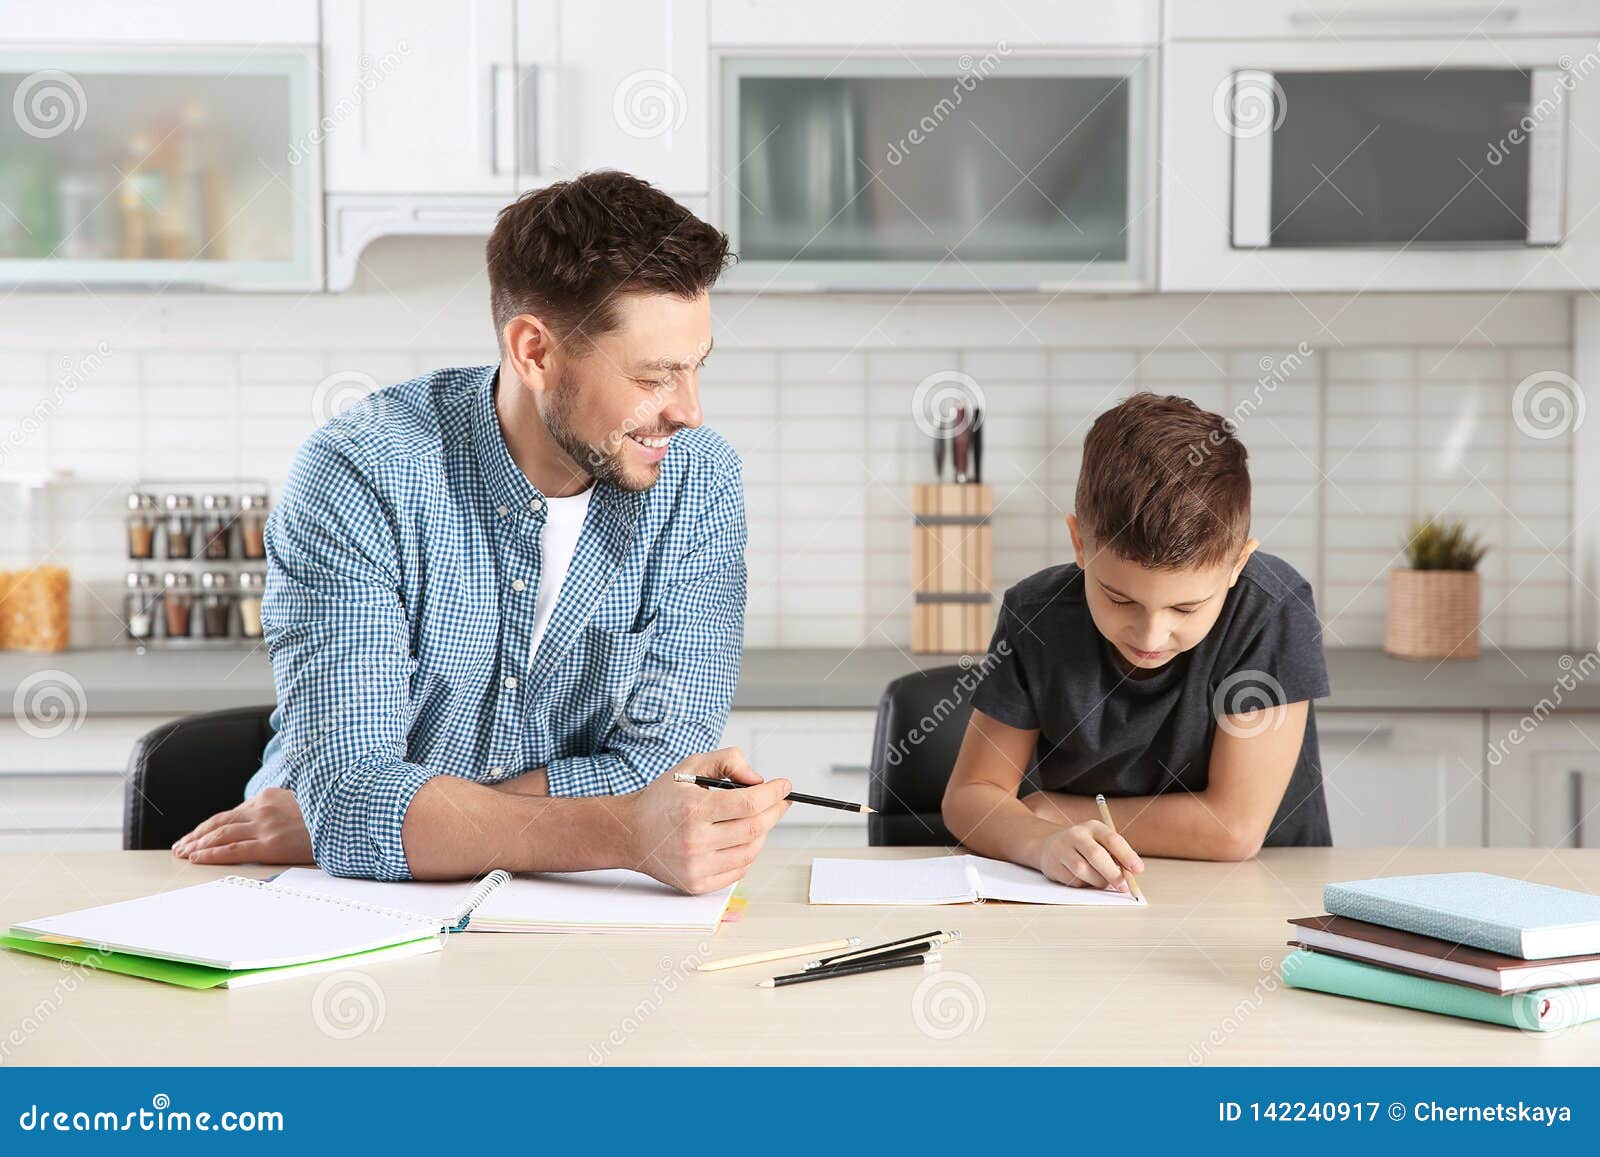 dad helping son with homework